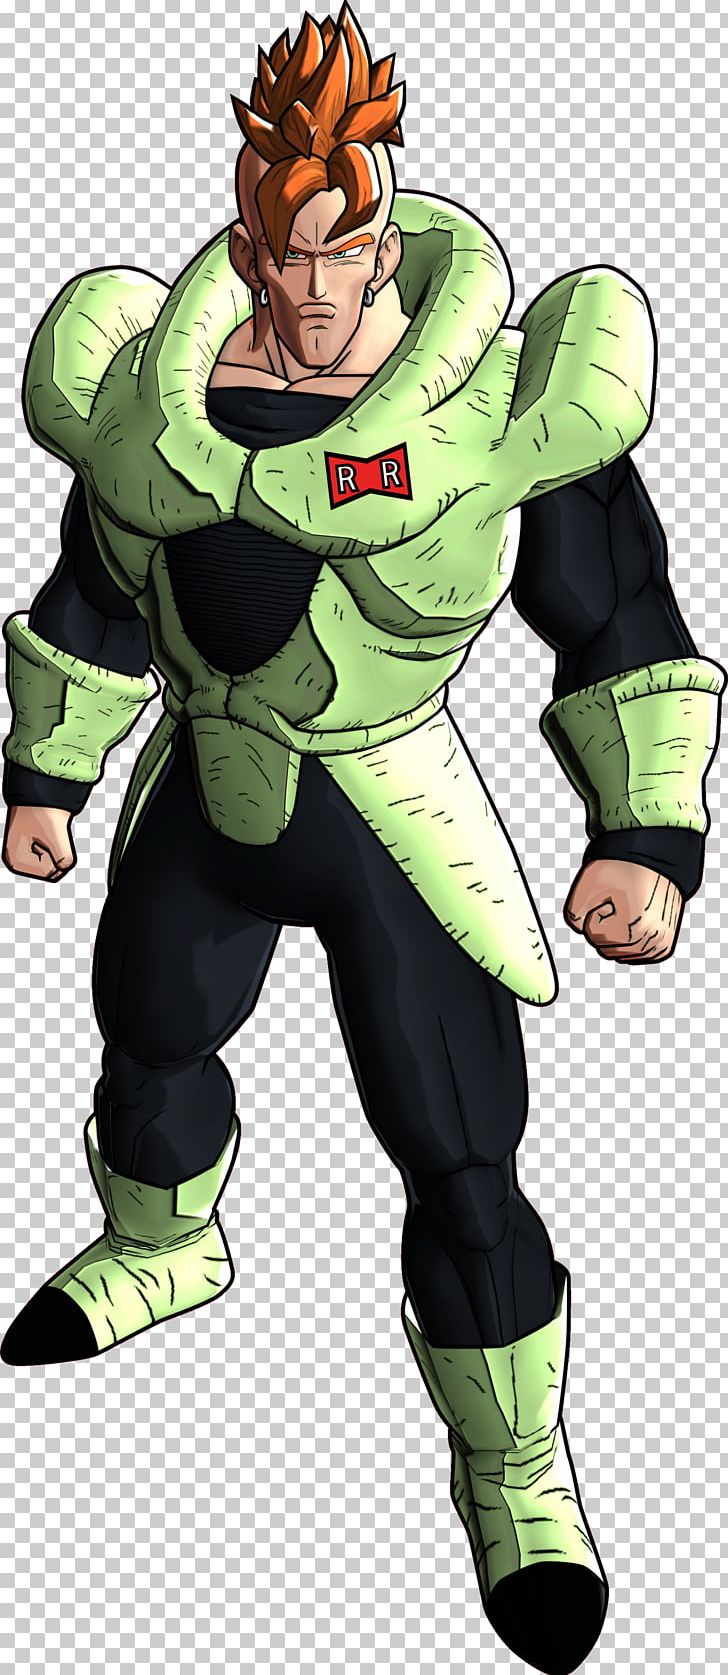 Dragon Ball Z: Battle Of Z Goku Trunks Android 16 PNG, Clipart, Android, Android 16, Art, Cartoon, Character Free PNG Download